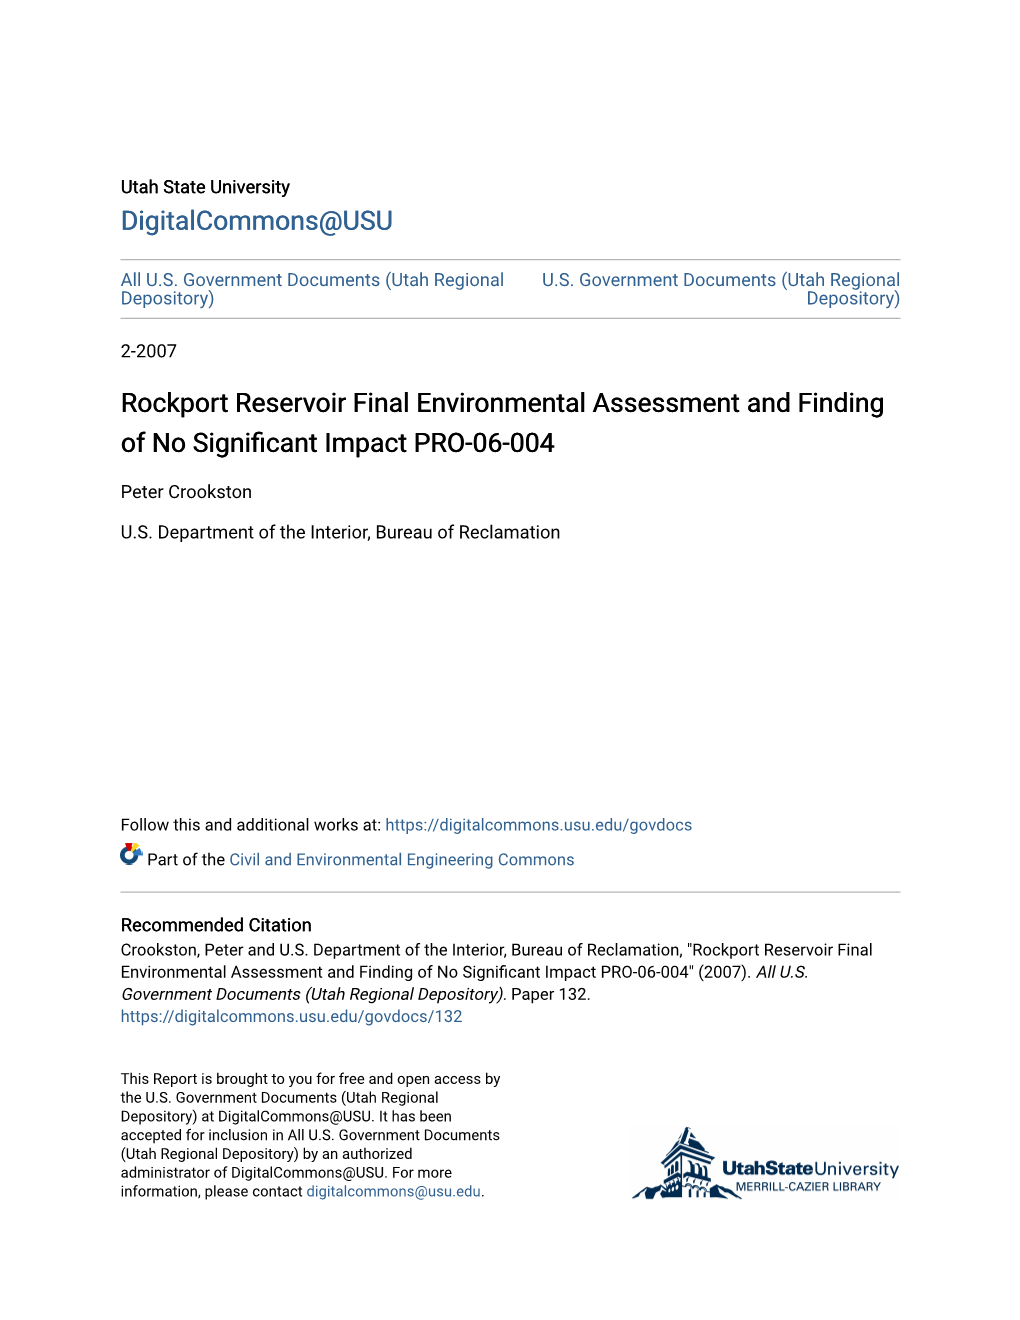 Rockport Reservoir Final Environmental Assessment and Finding of No Significant Impact PRO-06-004